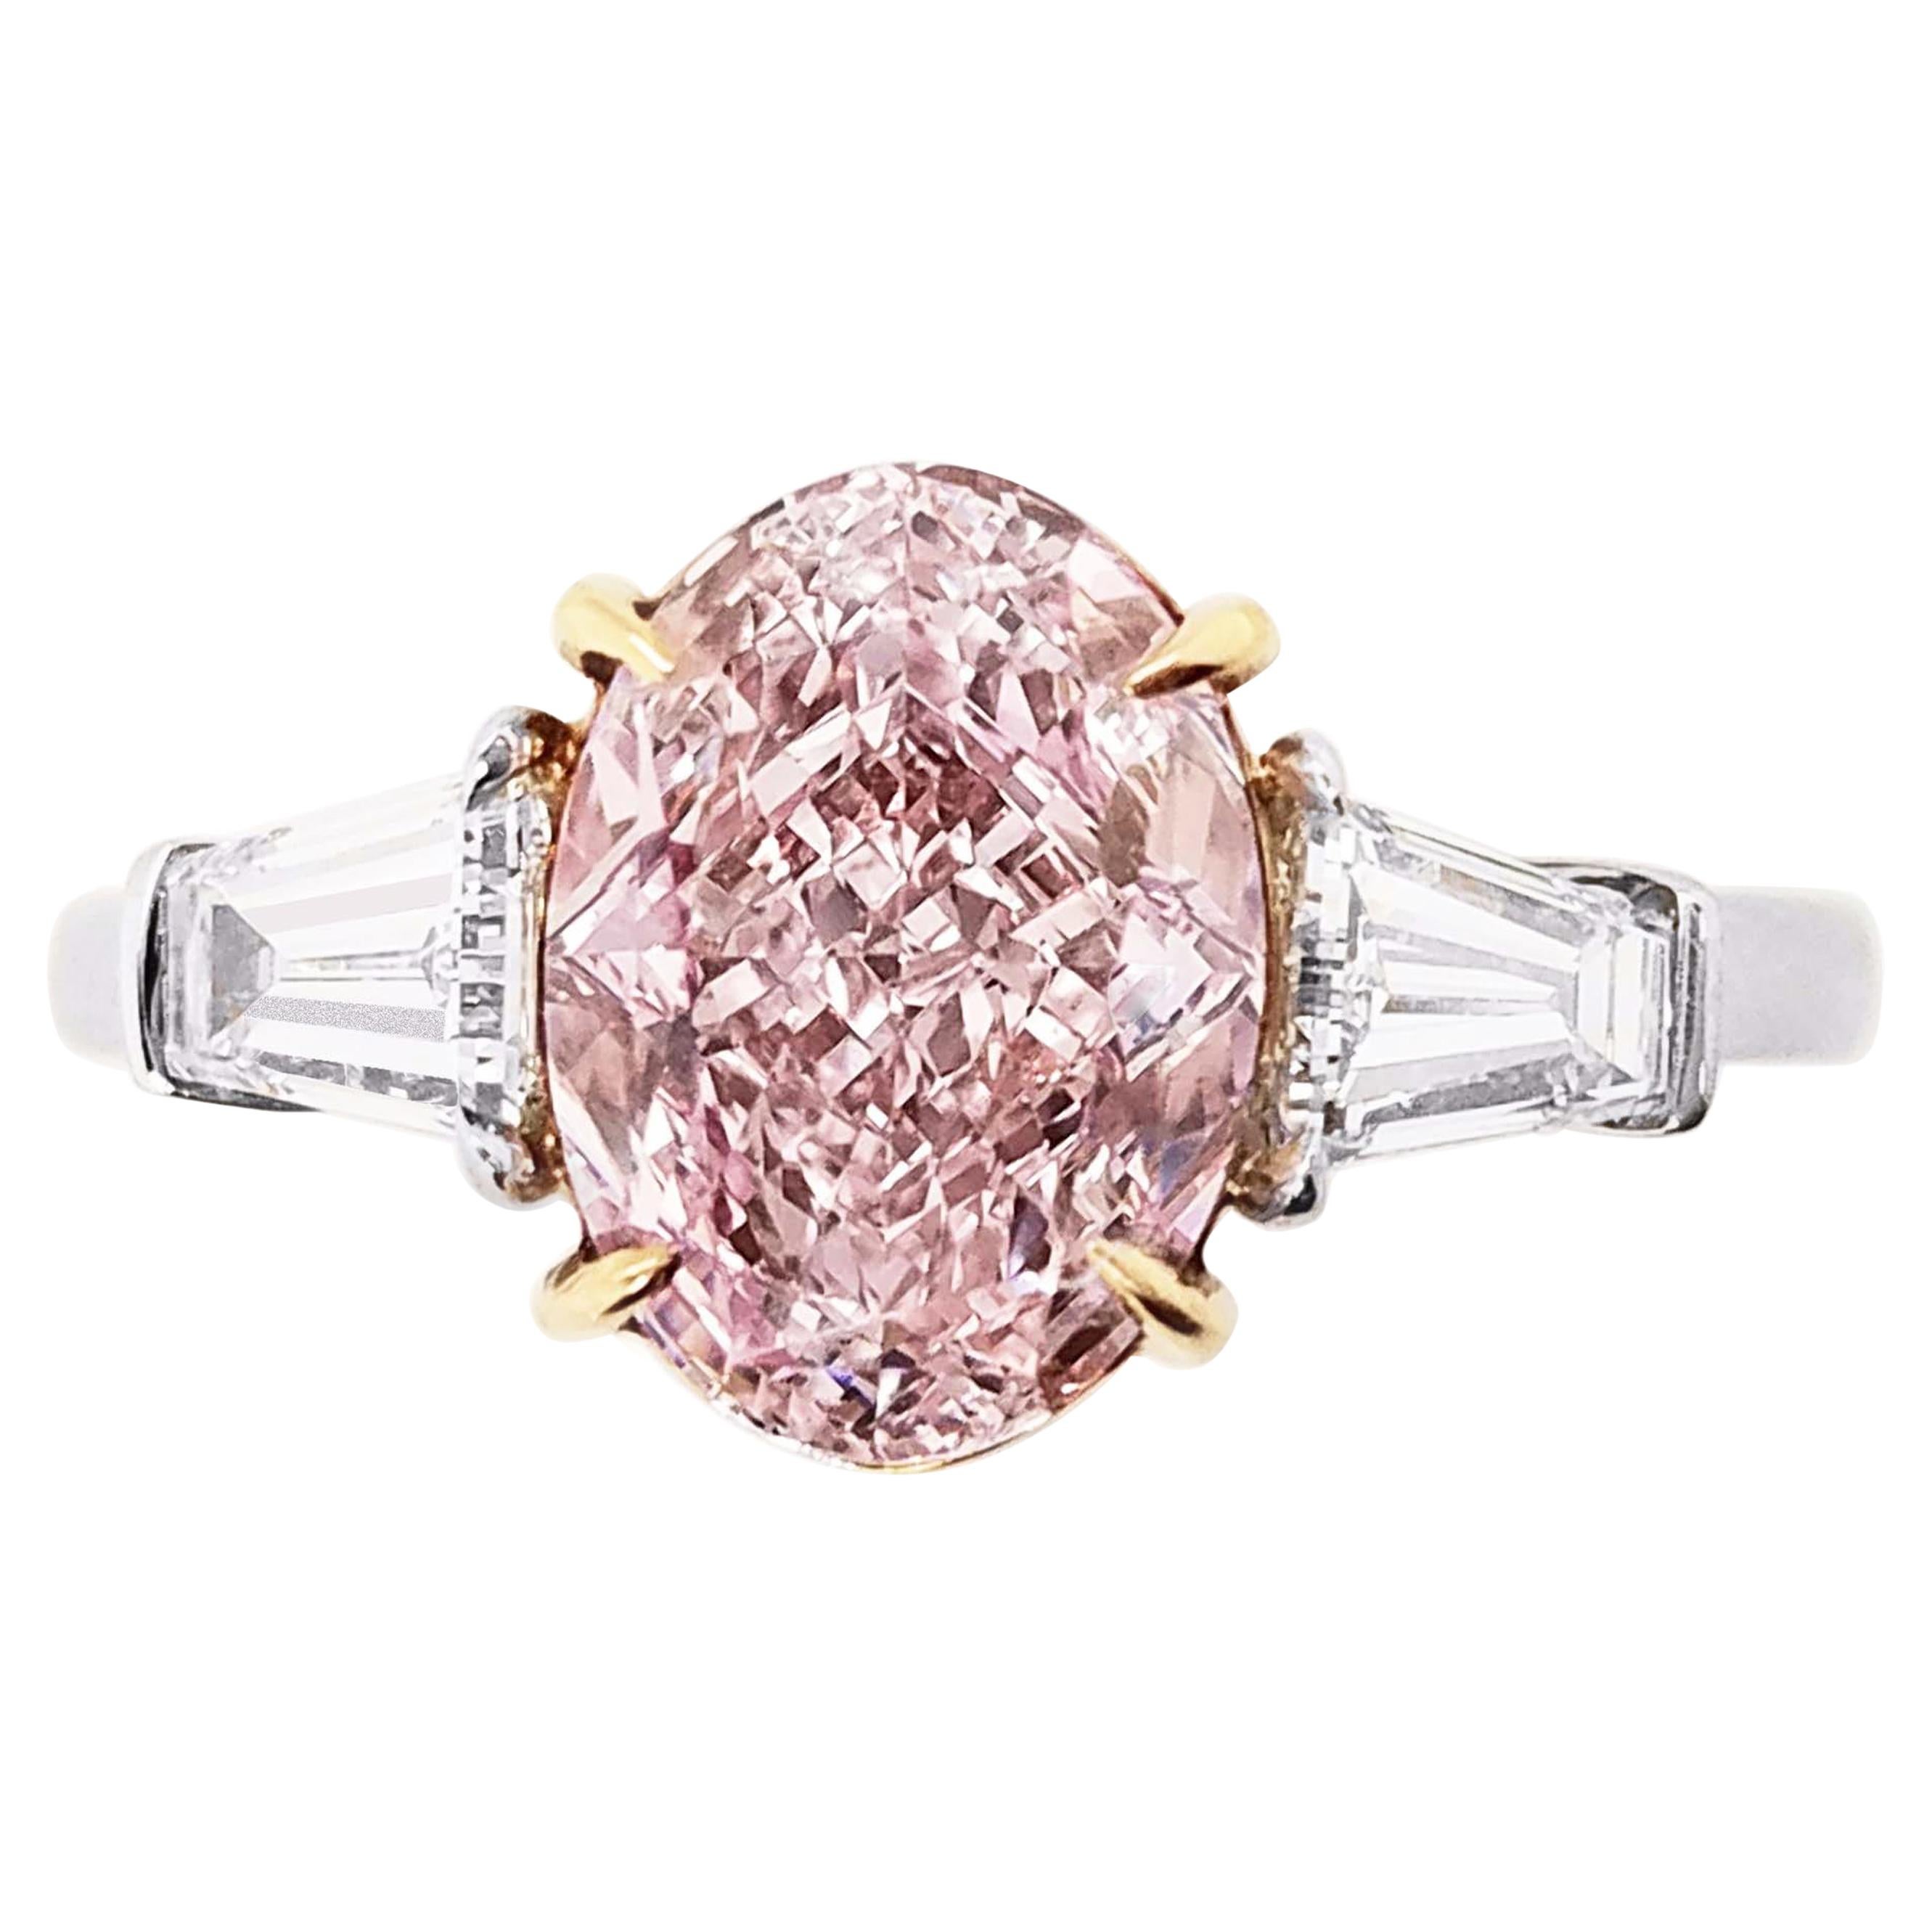 SCARSELLI 2 Carat Fancy Purple Pink Diamond Solitaire Ring GIA For Sale